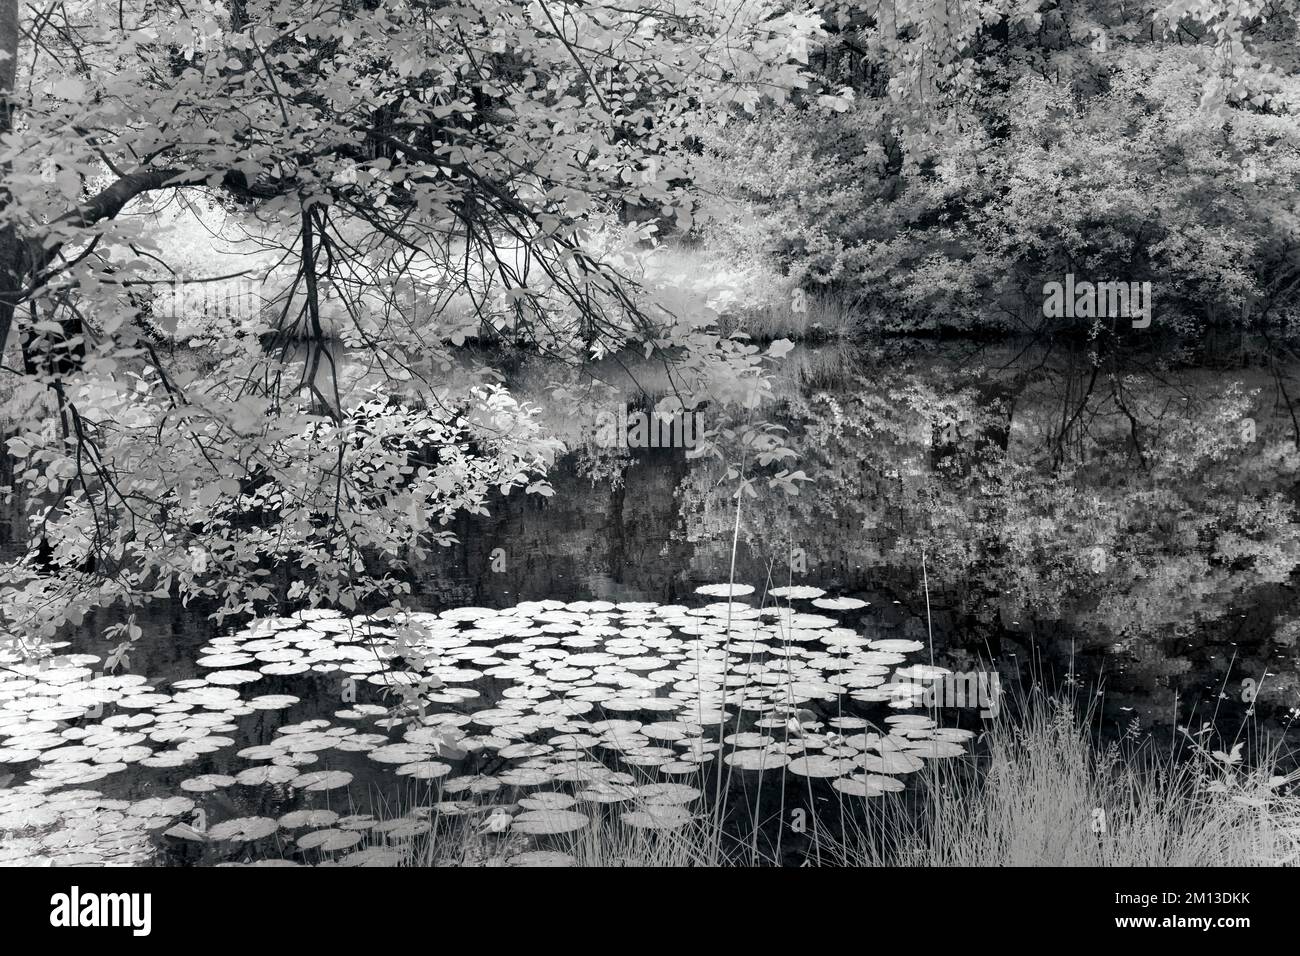 Black and white photograph of Horsepasture pool on Cannock Chase AONB Area of Outstanding Natural Beauty in Staffordshire England United Kingdom Stock Photo